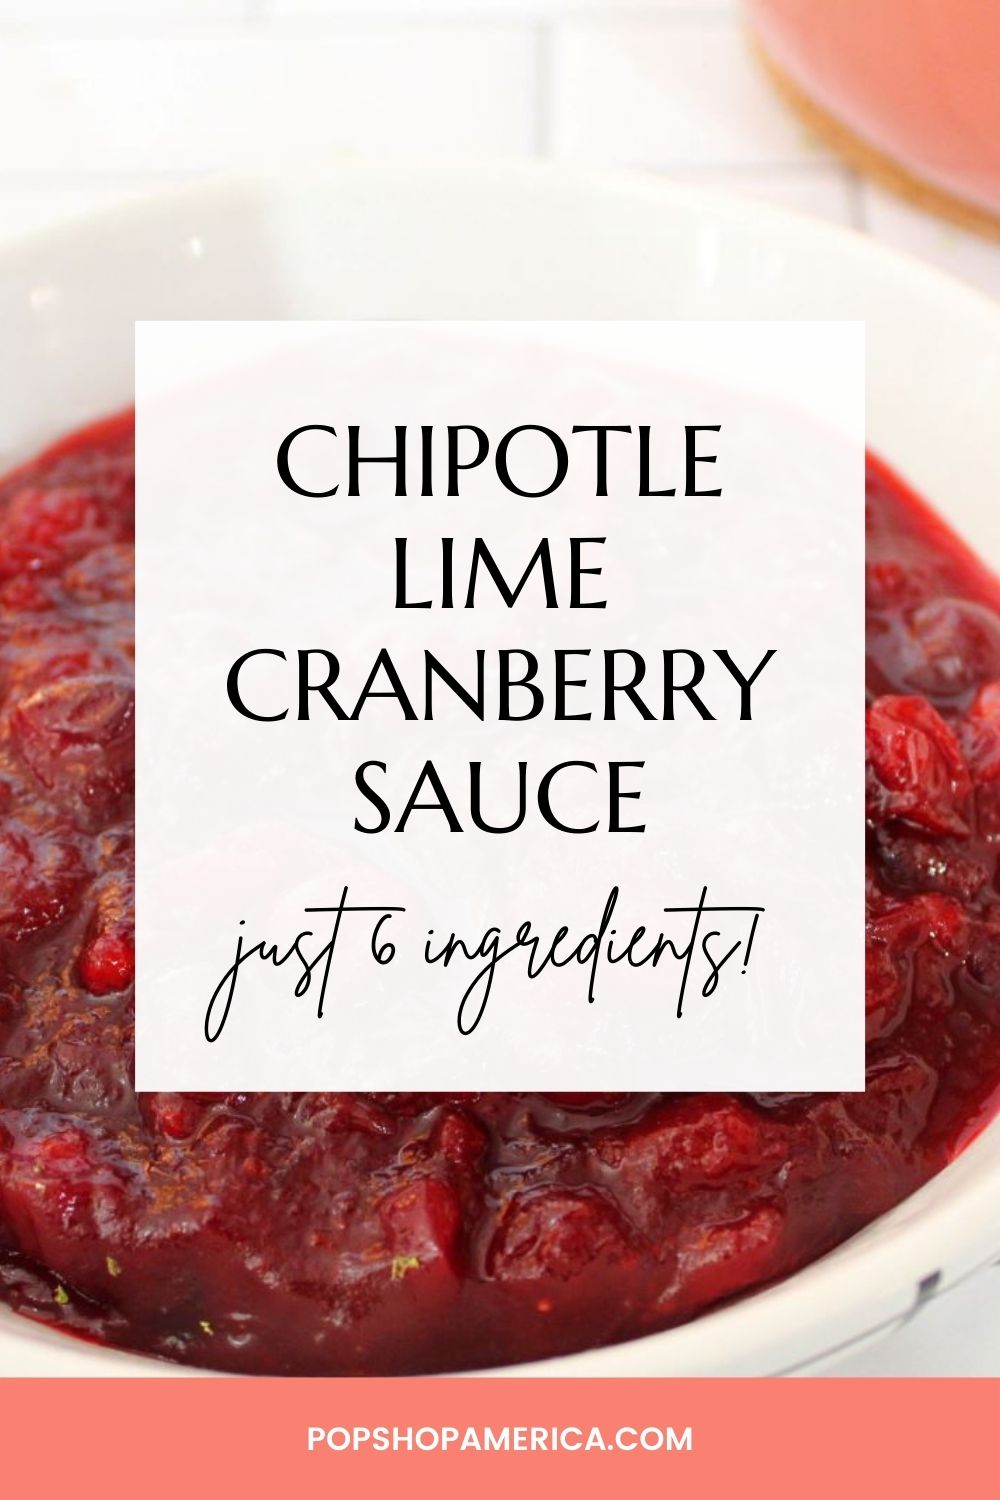 Chipotle Lime Cranberry Sauce Recipe